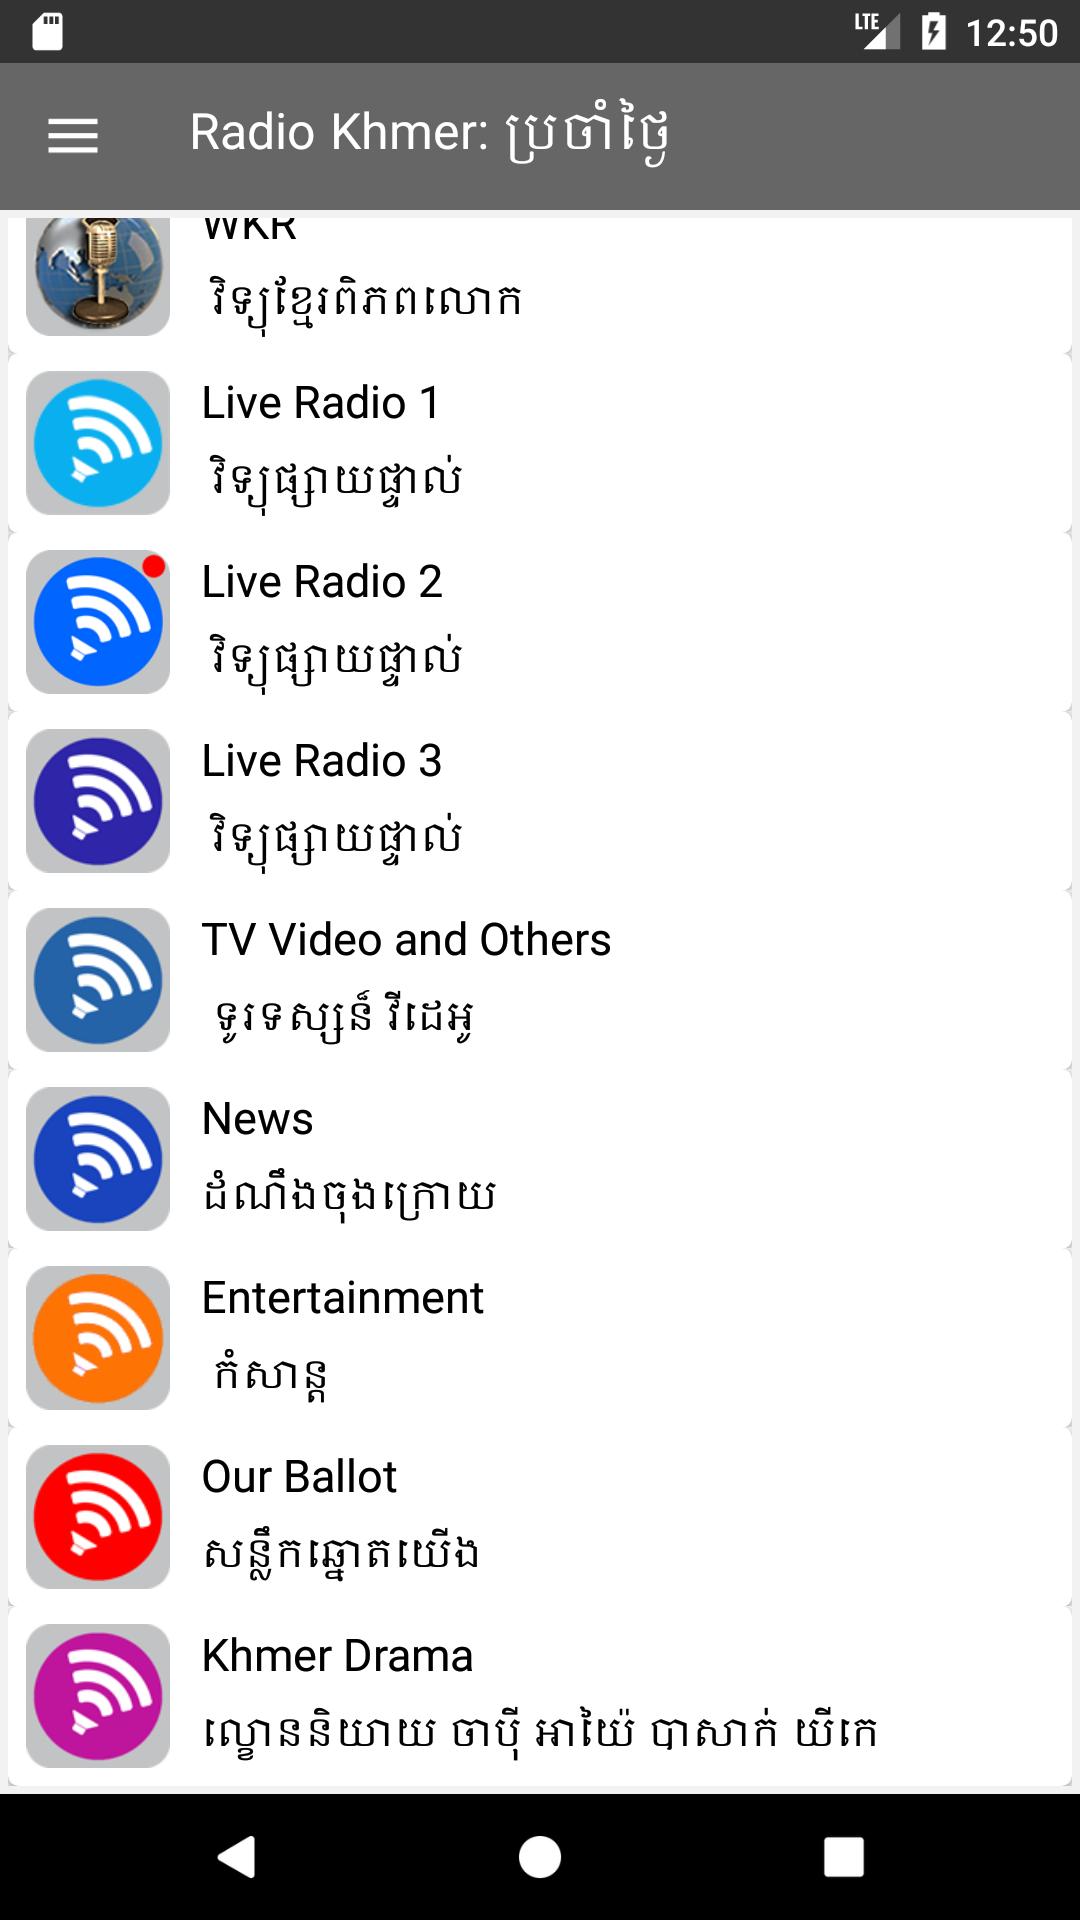 Radio Khmer for Android - APK Download